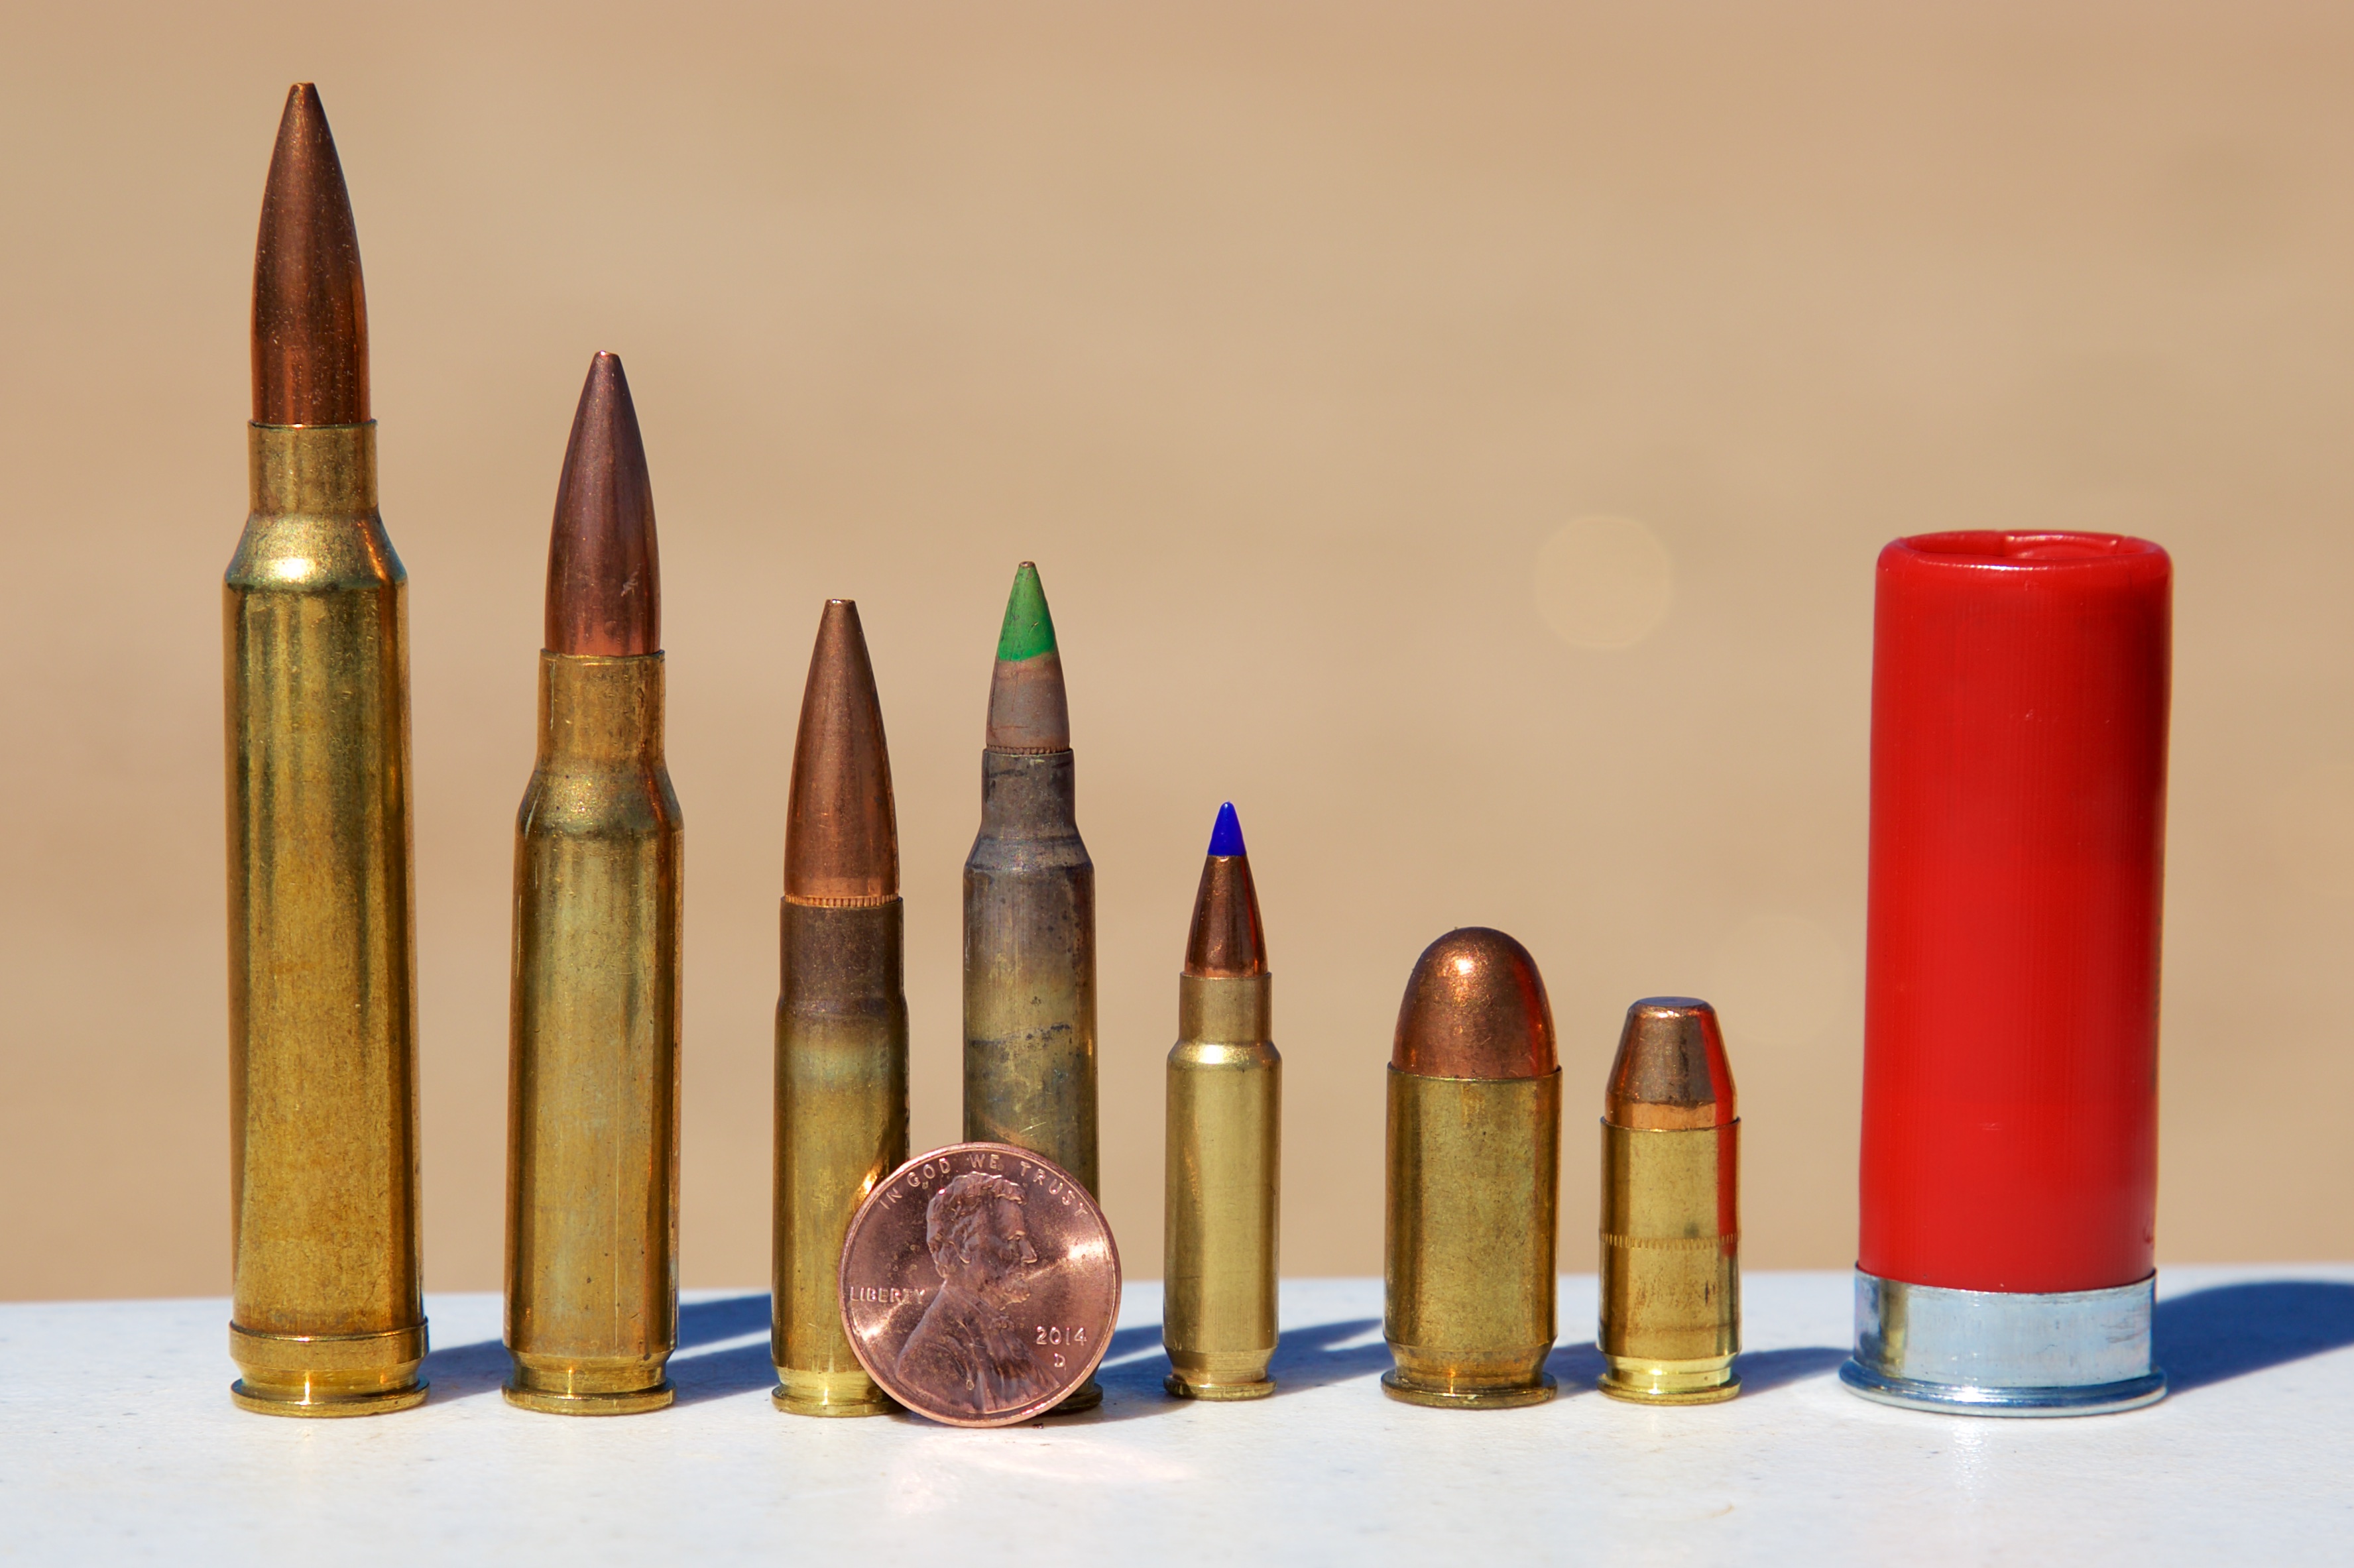 From left to right: .300 Winchester Magnum, 7.62mm NATO, 300 Blackout, 5.56mm NATO, FN 5....